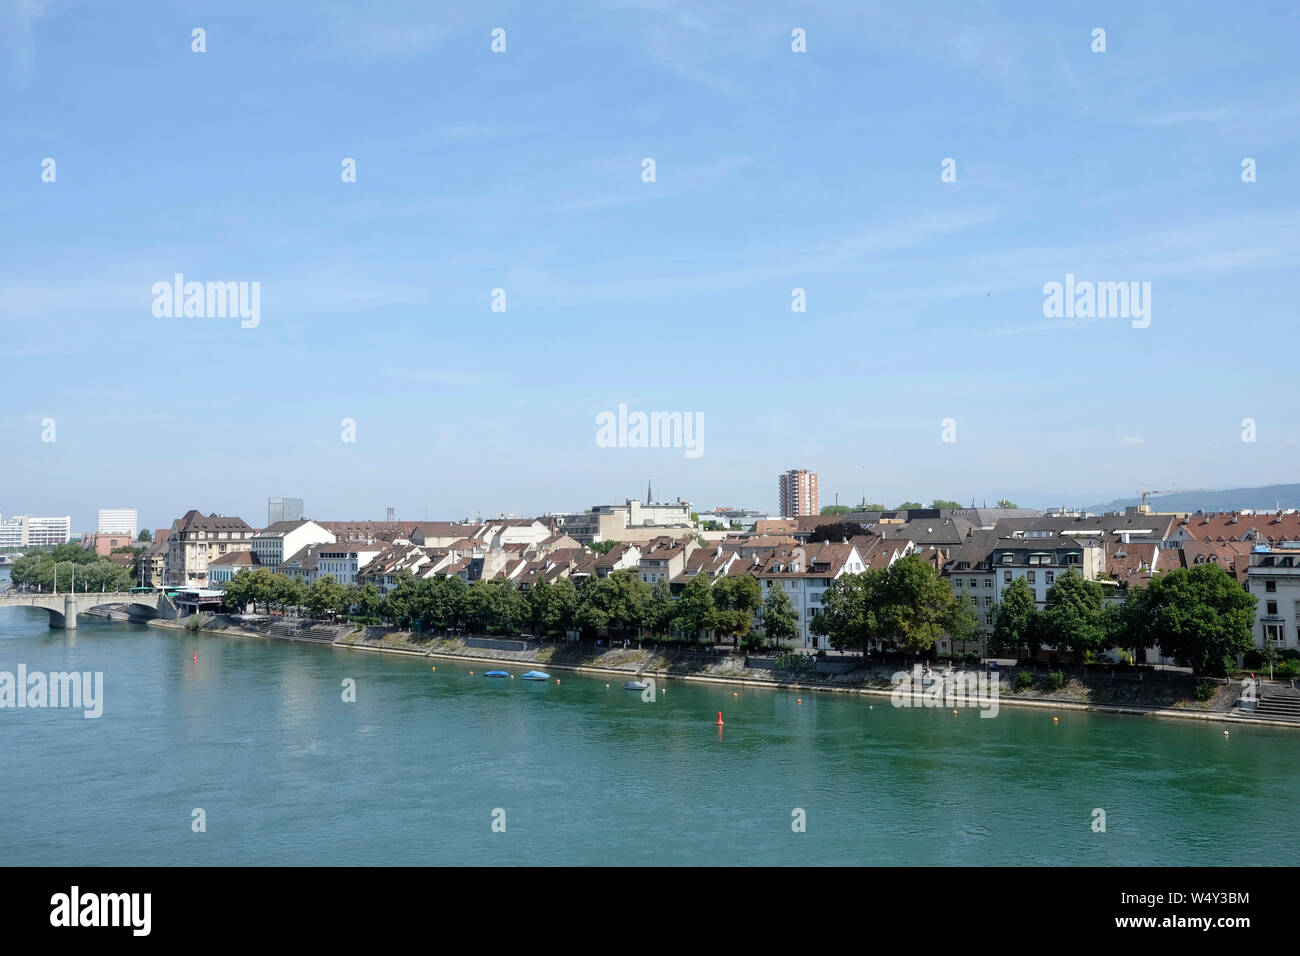 A view of Basel skyline from the Pfalz viewing terrace, Switzerland Stock Photo